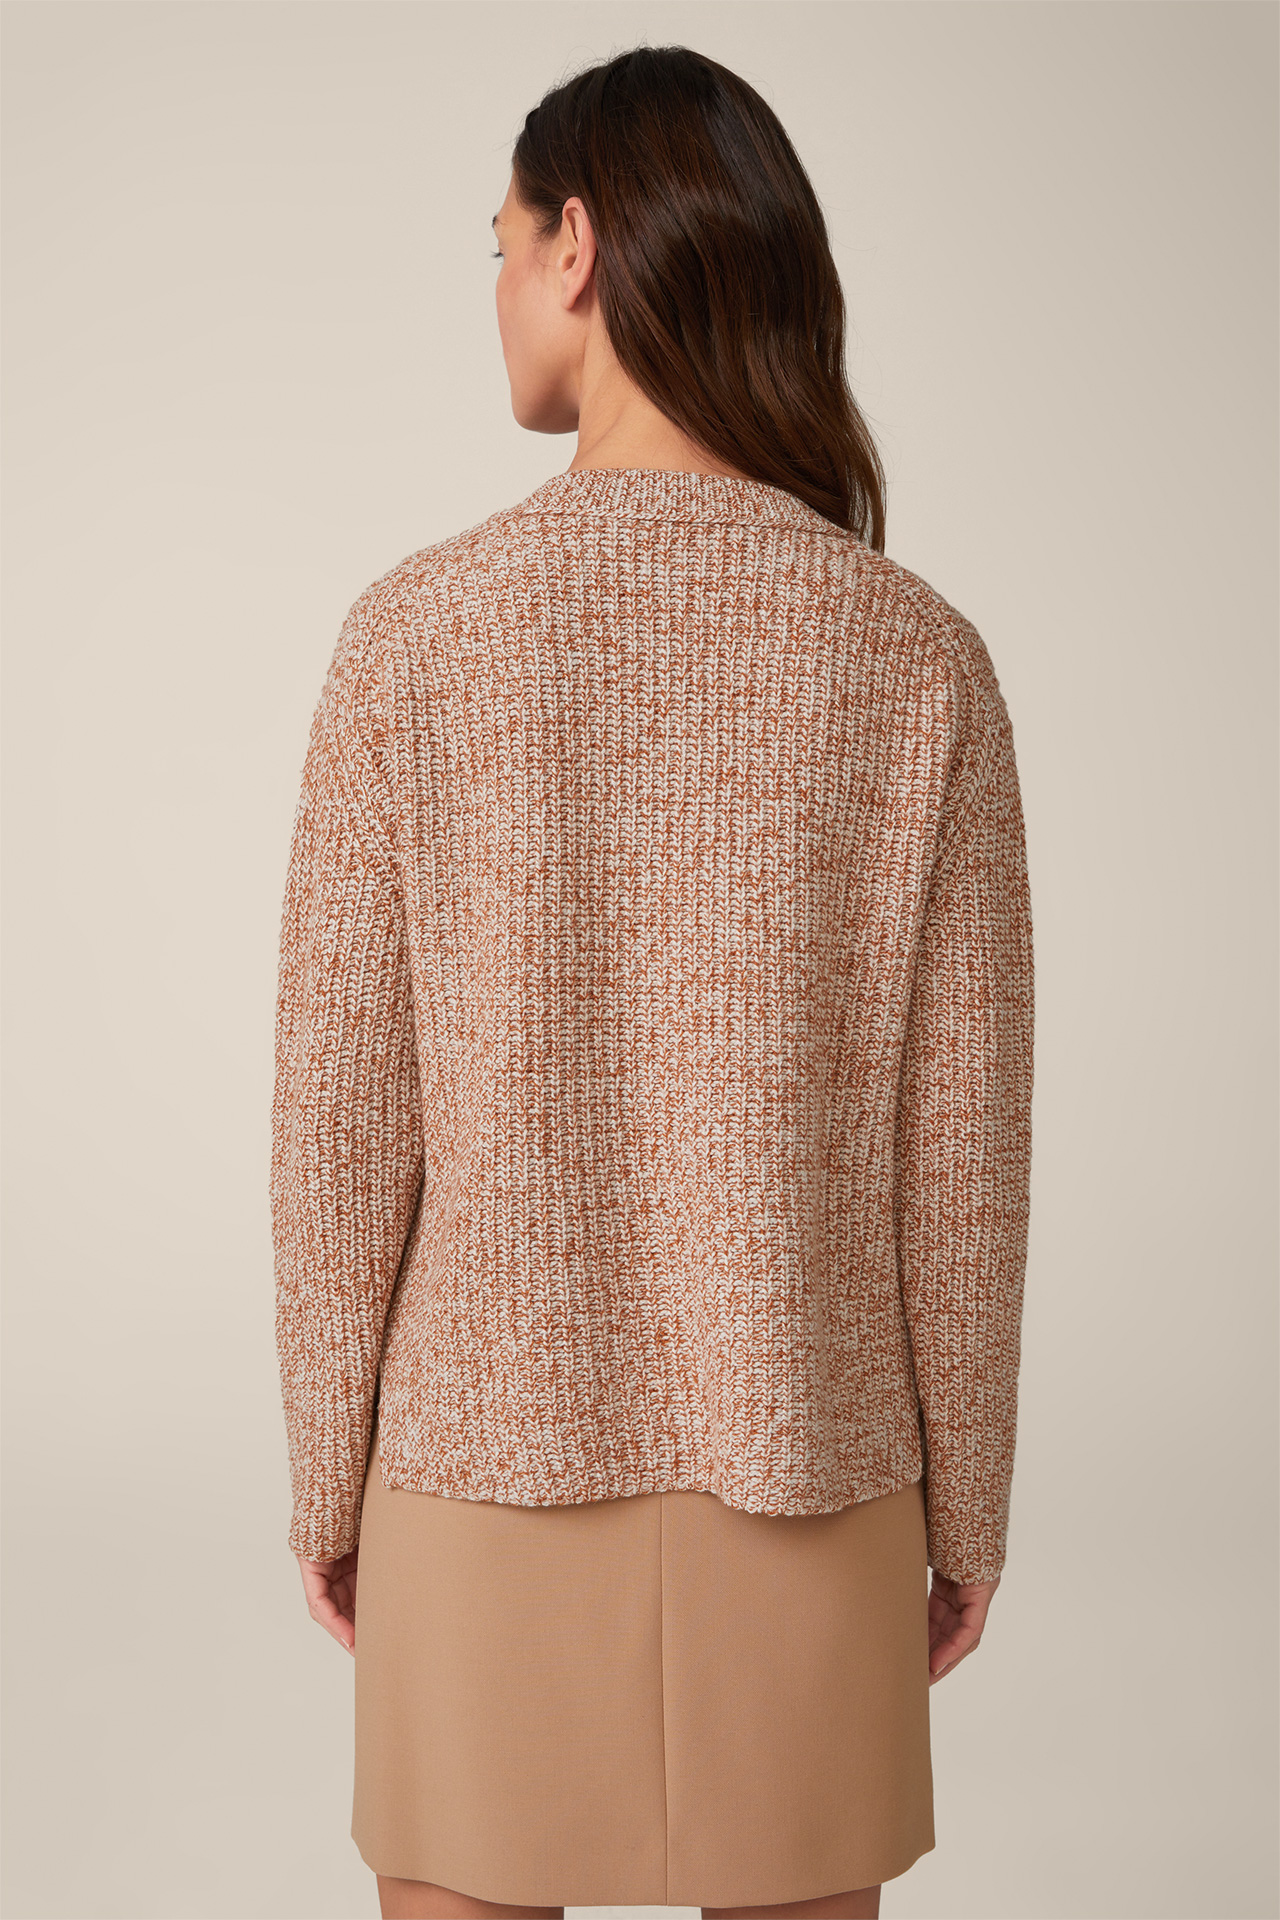 Virgin Wool Pullover with Cashmere in Copper and Ecru Patterned